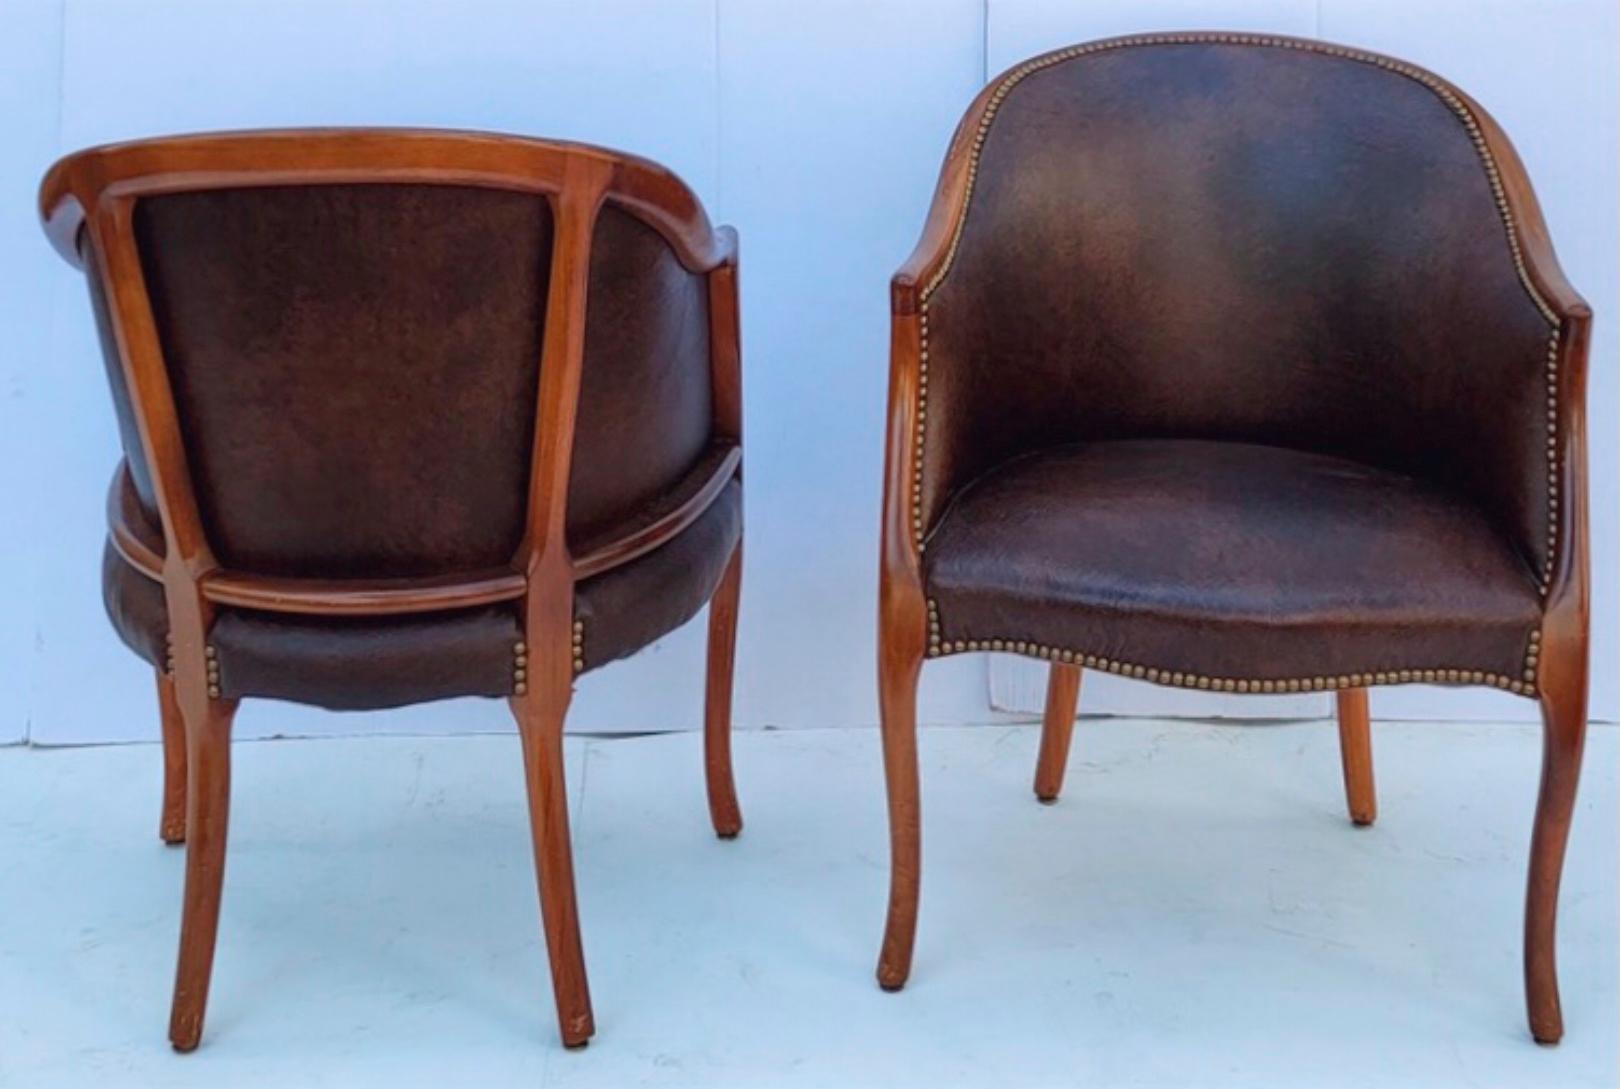 American Classical Mid-Century Carved Fruitwood and Leather Club Chairs by Baker Furniture